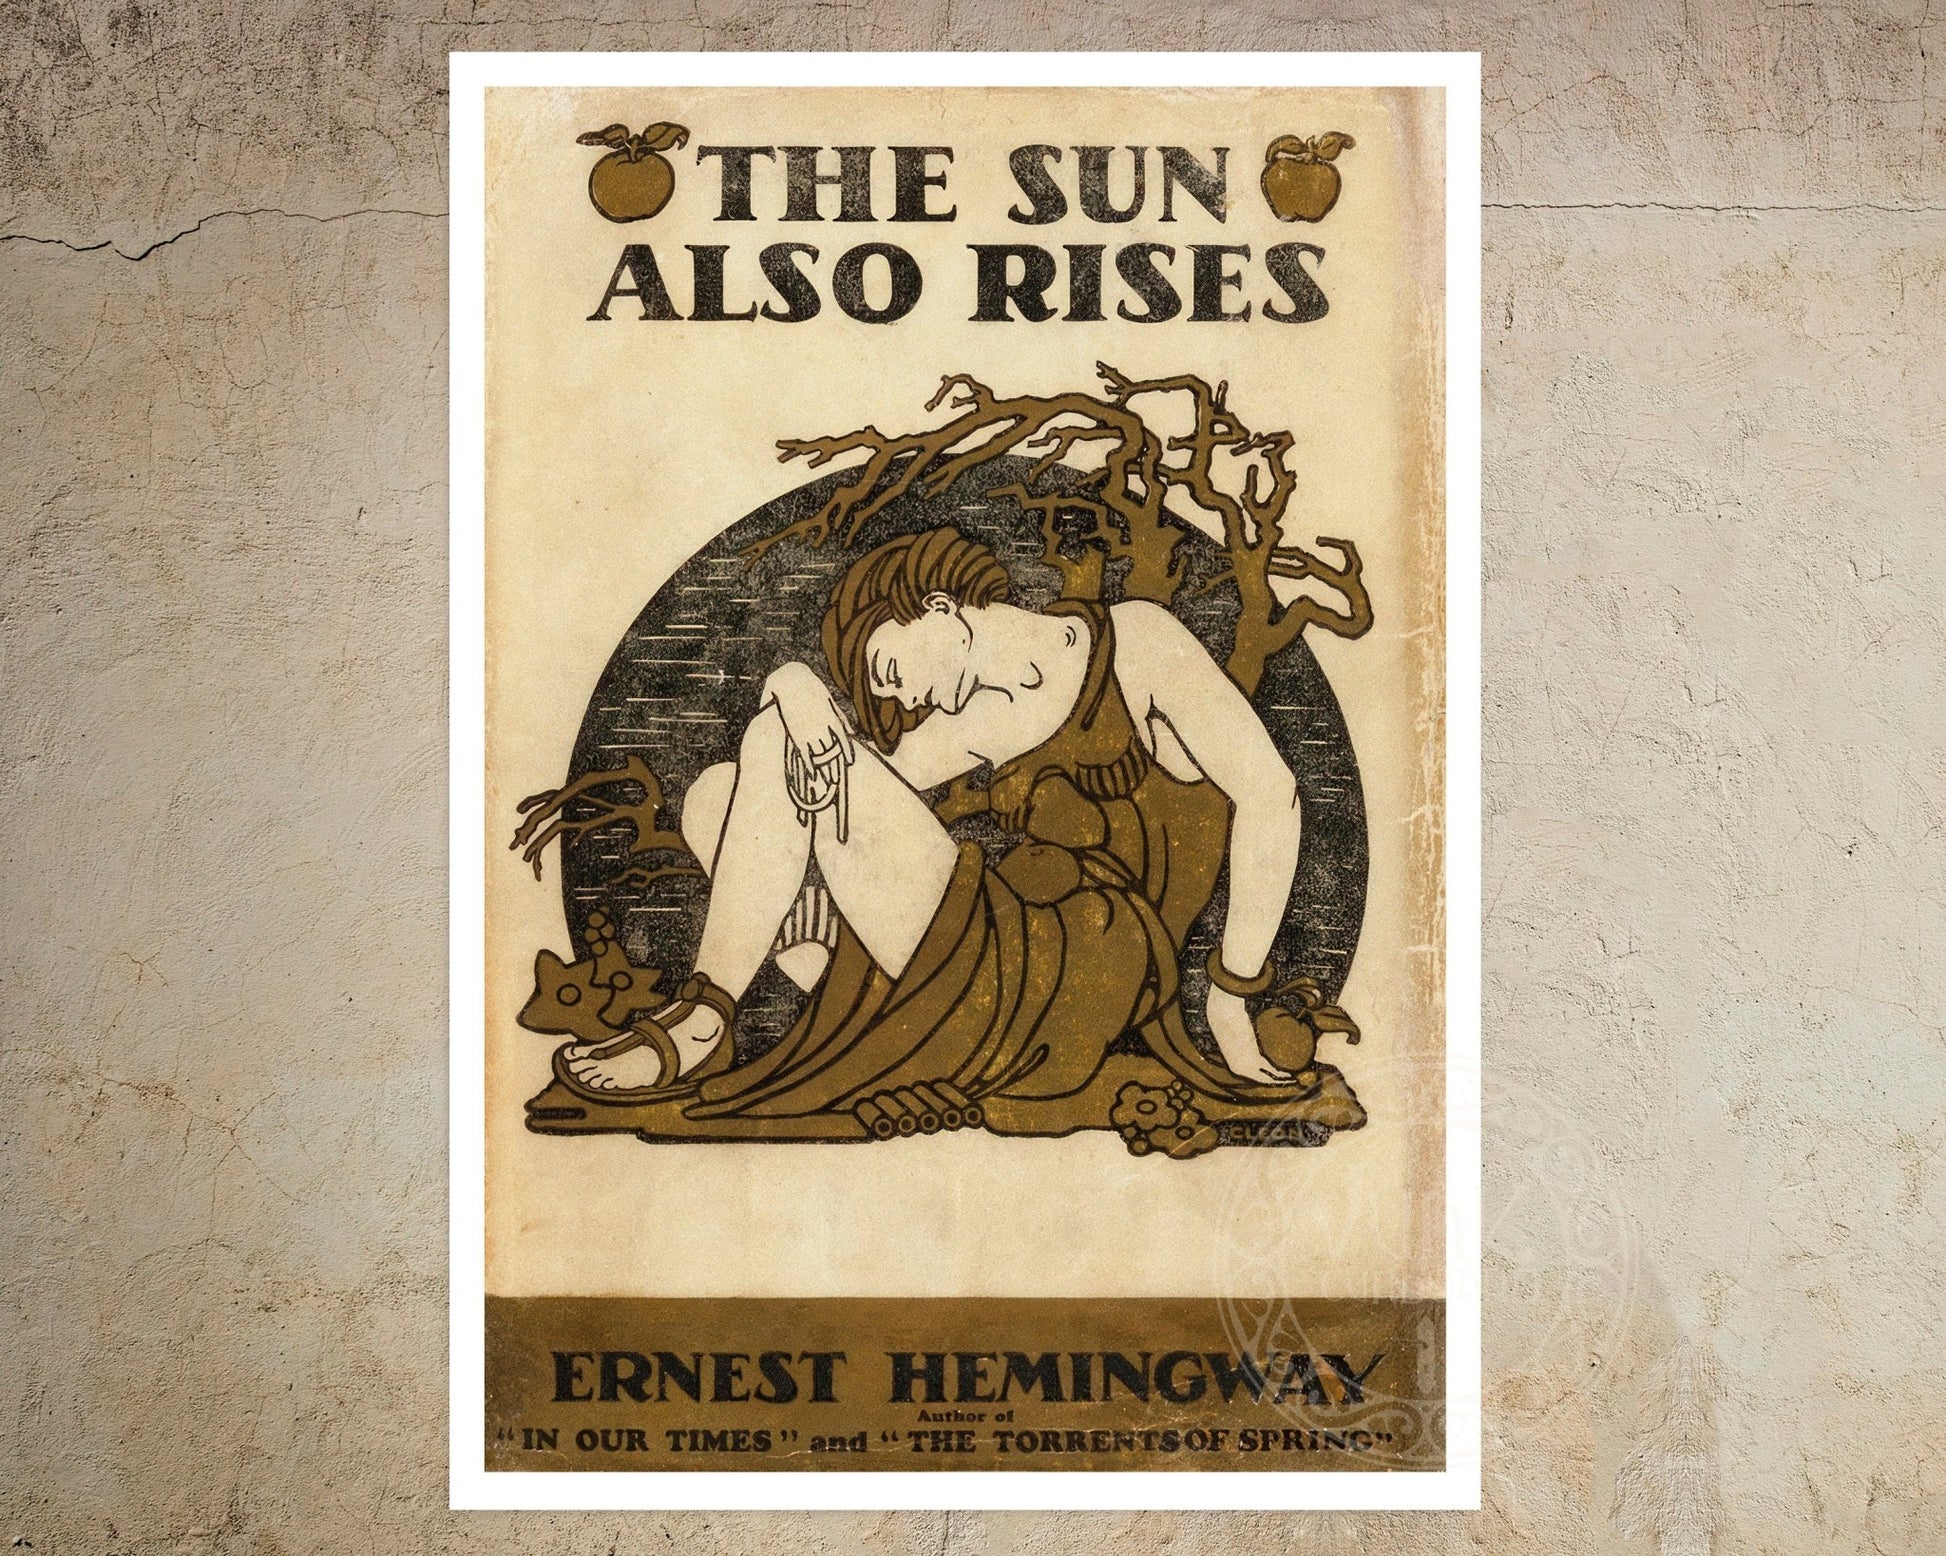 Cleo Damianakes "The Sun Also Rises, Ernest Hemingway" (c.1926) - Mabon Gallery